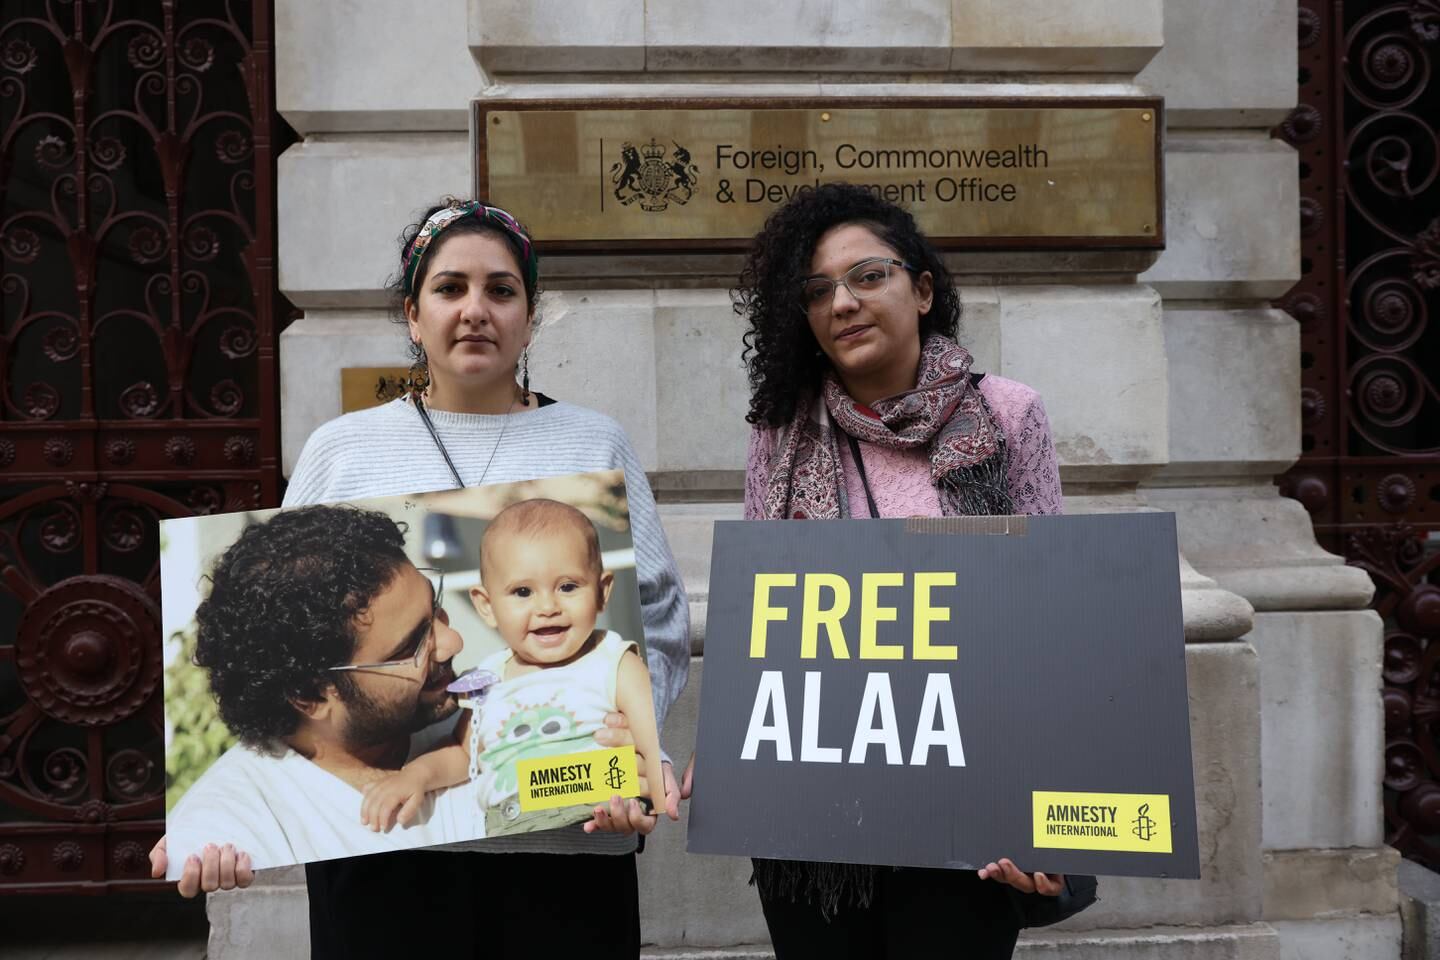 Mona Seif, left, and her sister Sanaa hold placards calling for the release of their brother, Alaa Abdel Fattah, outside the Foreign, Commonwealth and Development Office in London, last month. Getty 